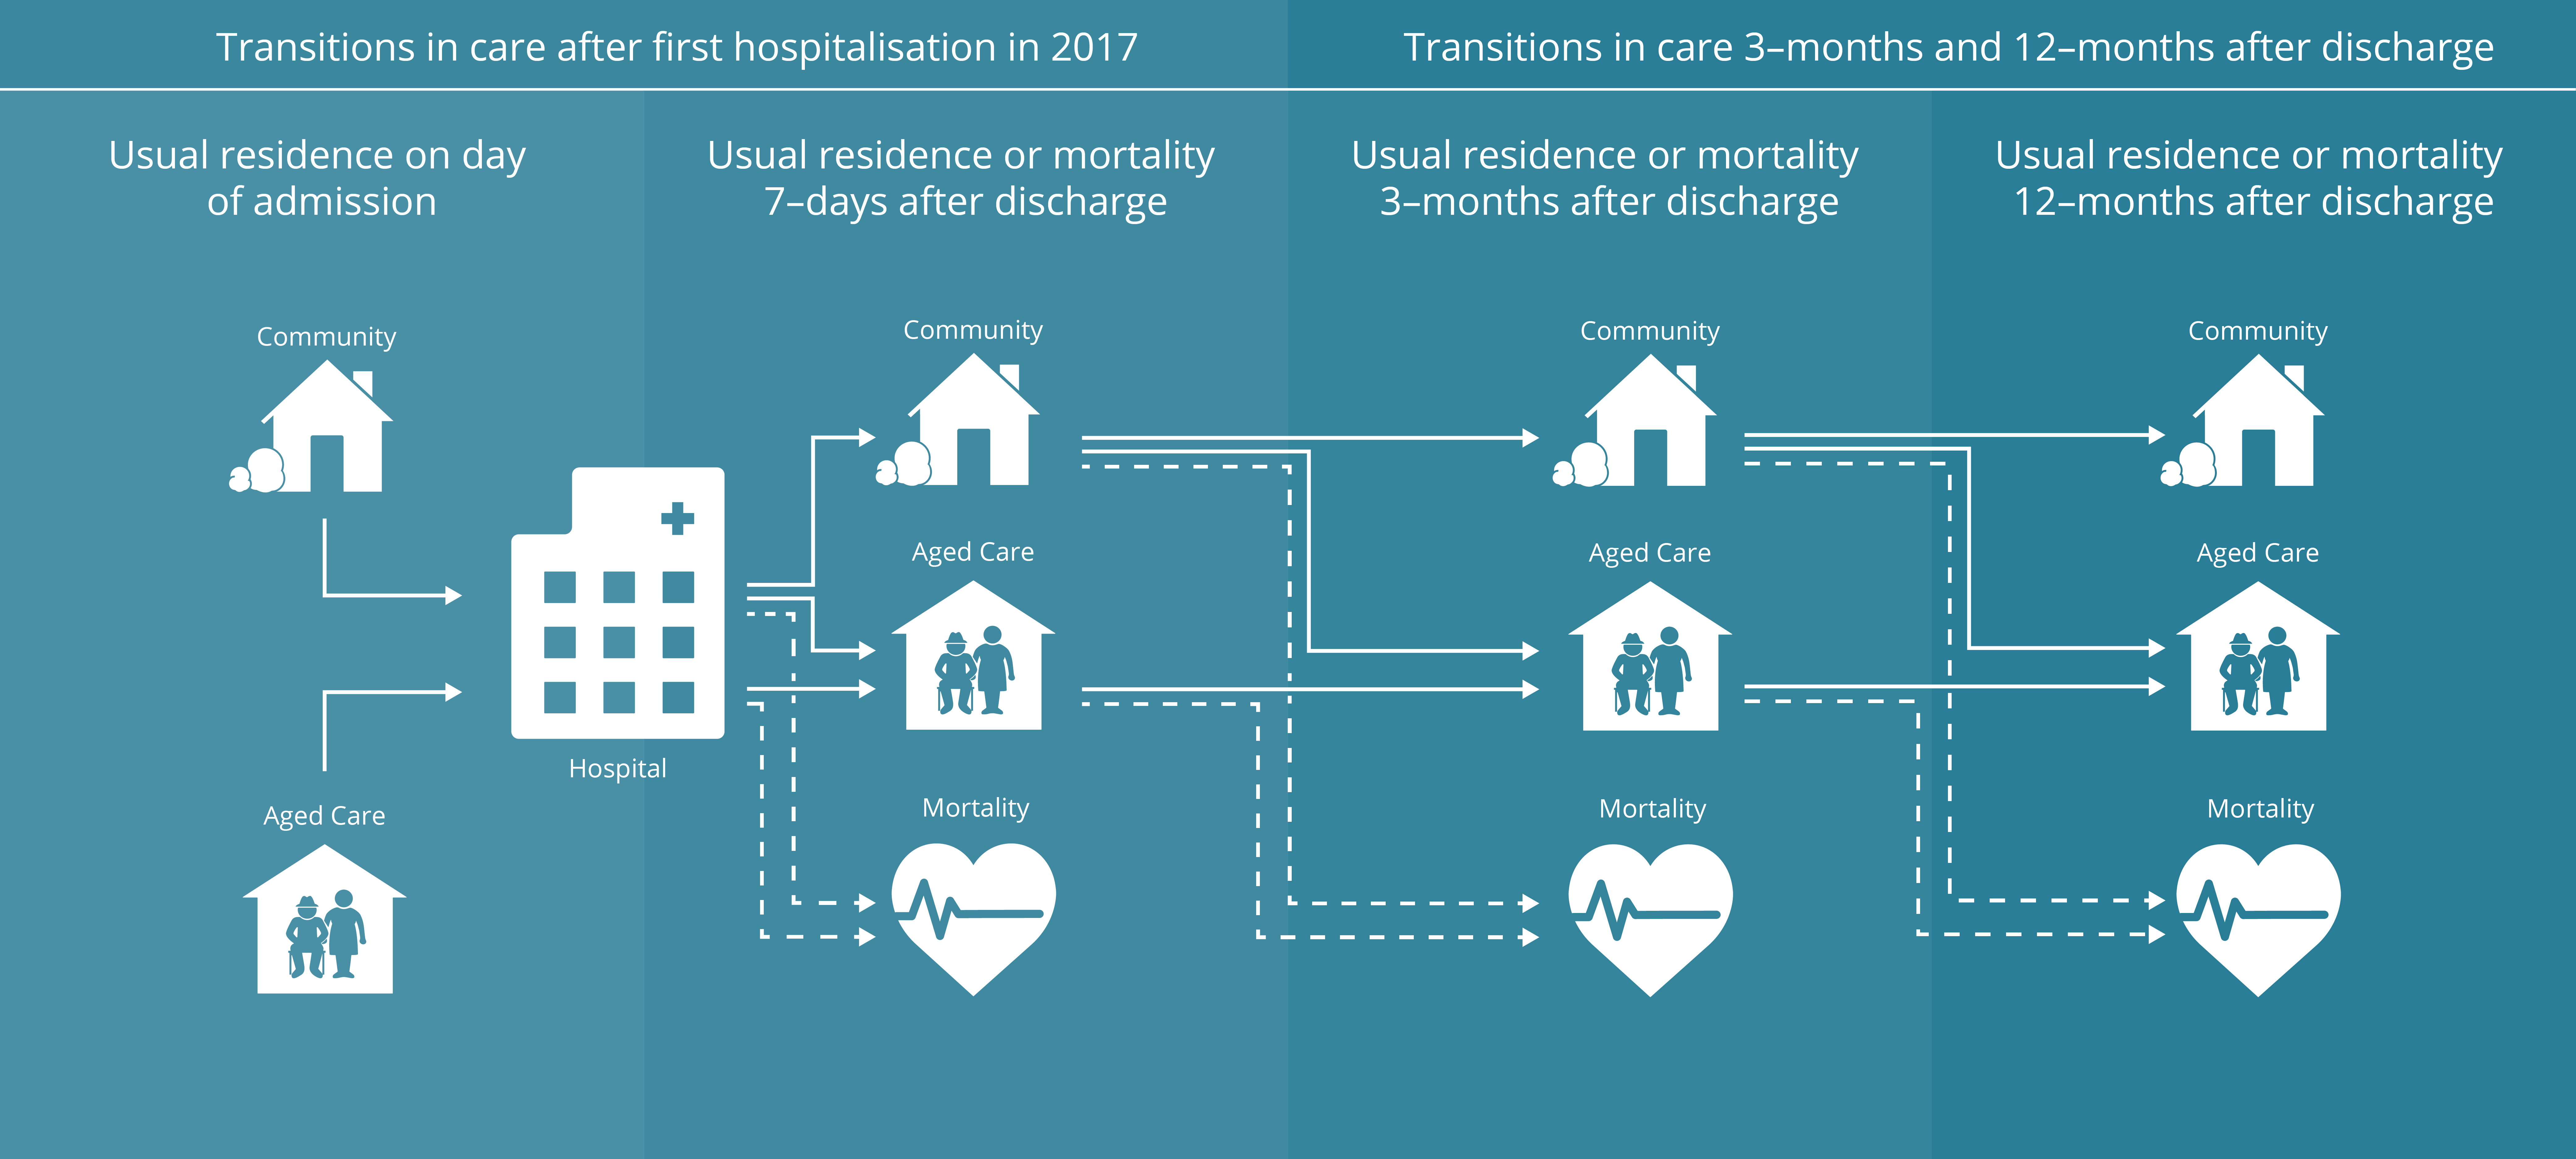 The figure is a conceptual diagram demonstrating that usual residence is classified as "community" or "residential aged care", and this report examined people's transitions between usual residence (or mortality) on the day of admission to hospital, within 7-days of discharge, within 3-months of discharge and within 12-months of discharge.